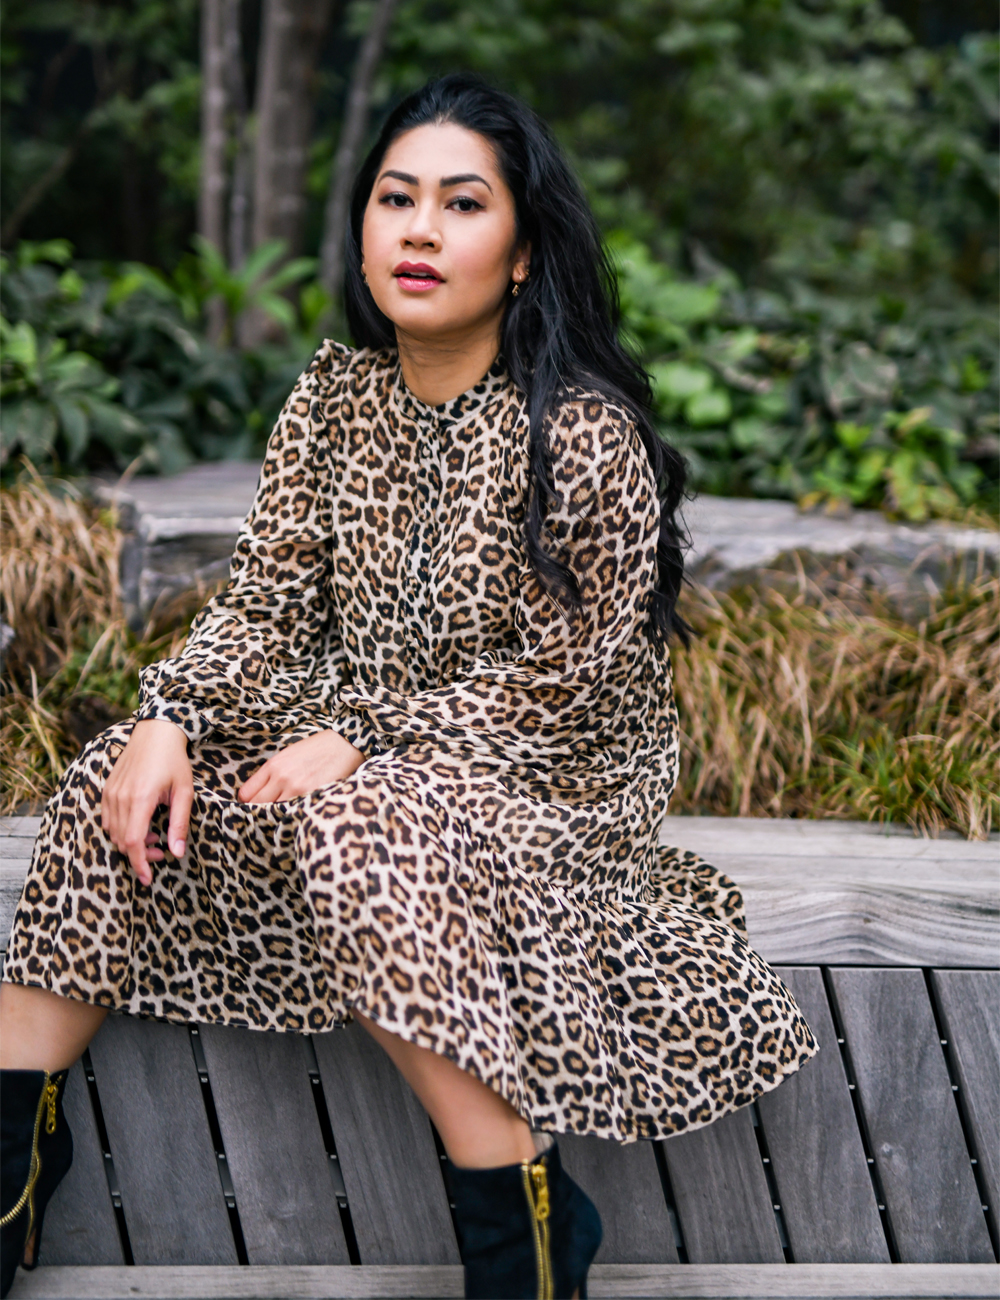 This leopard print dress from H&M is super comfy and stylish to boot